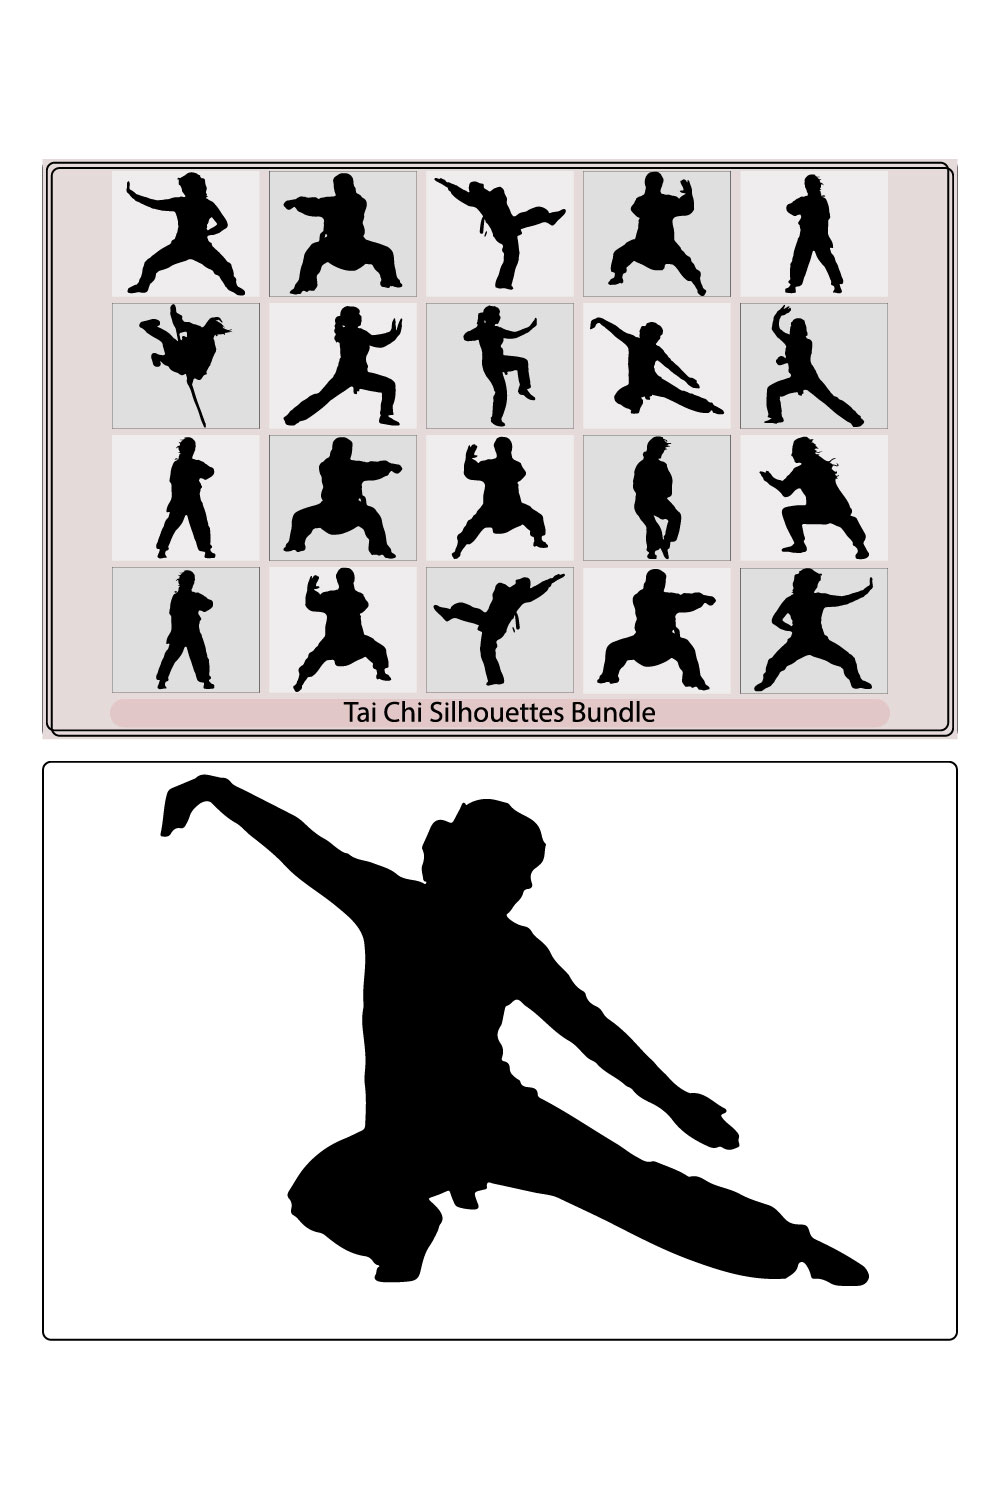 silhouettes of people practicing Tai Chi,Martial Art Kung Fu Tai Chi Self Defense Exercise Fight Master People Man,Tai Chi Chuan man silhouette vector pinterest preview image.